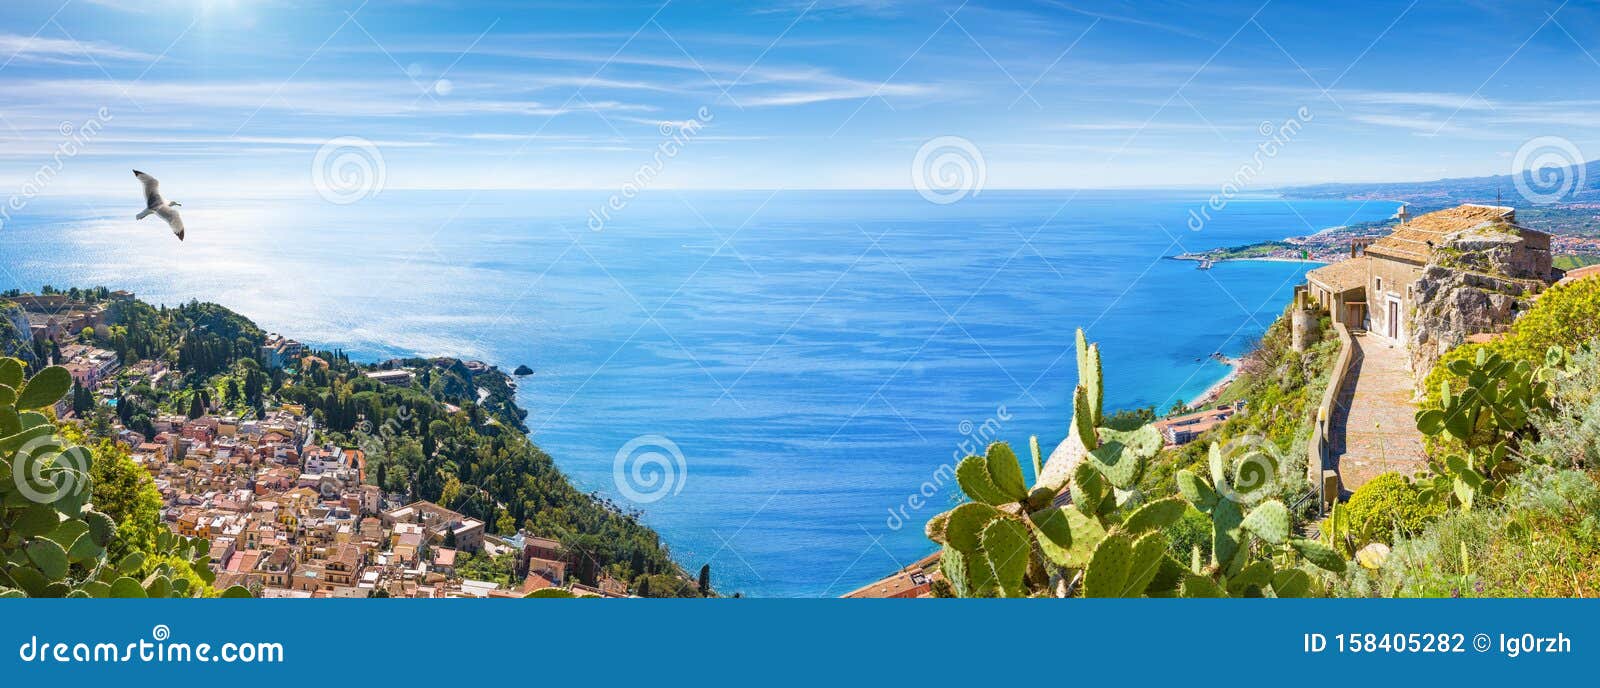 panoramic collage with aerial view of taormina and church of madonna della rocca built on rock, sicily, italy